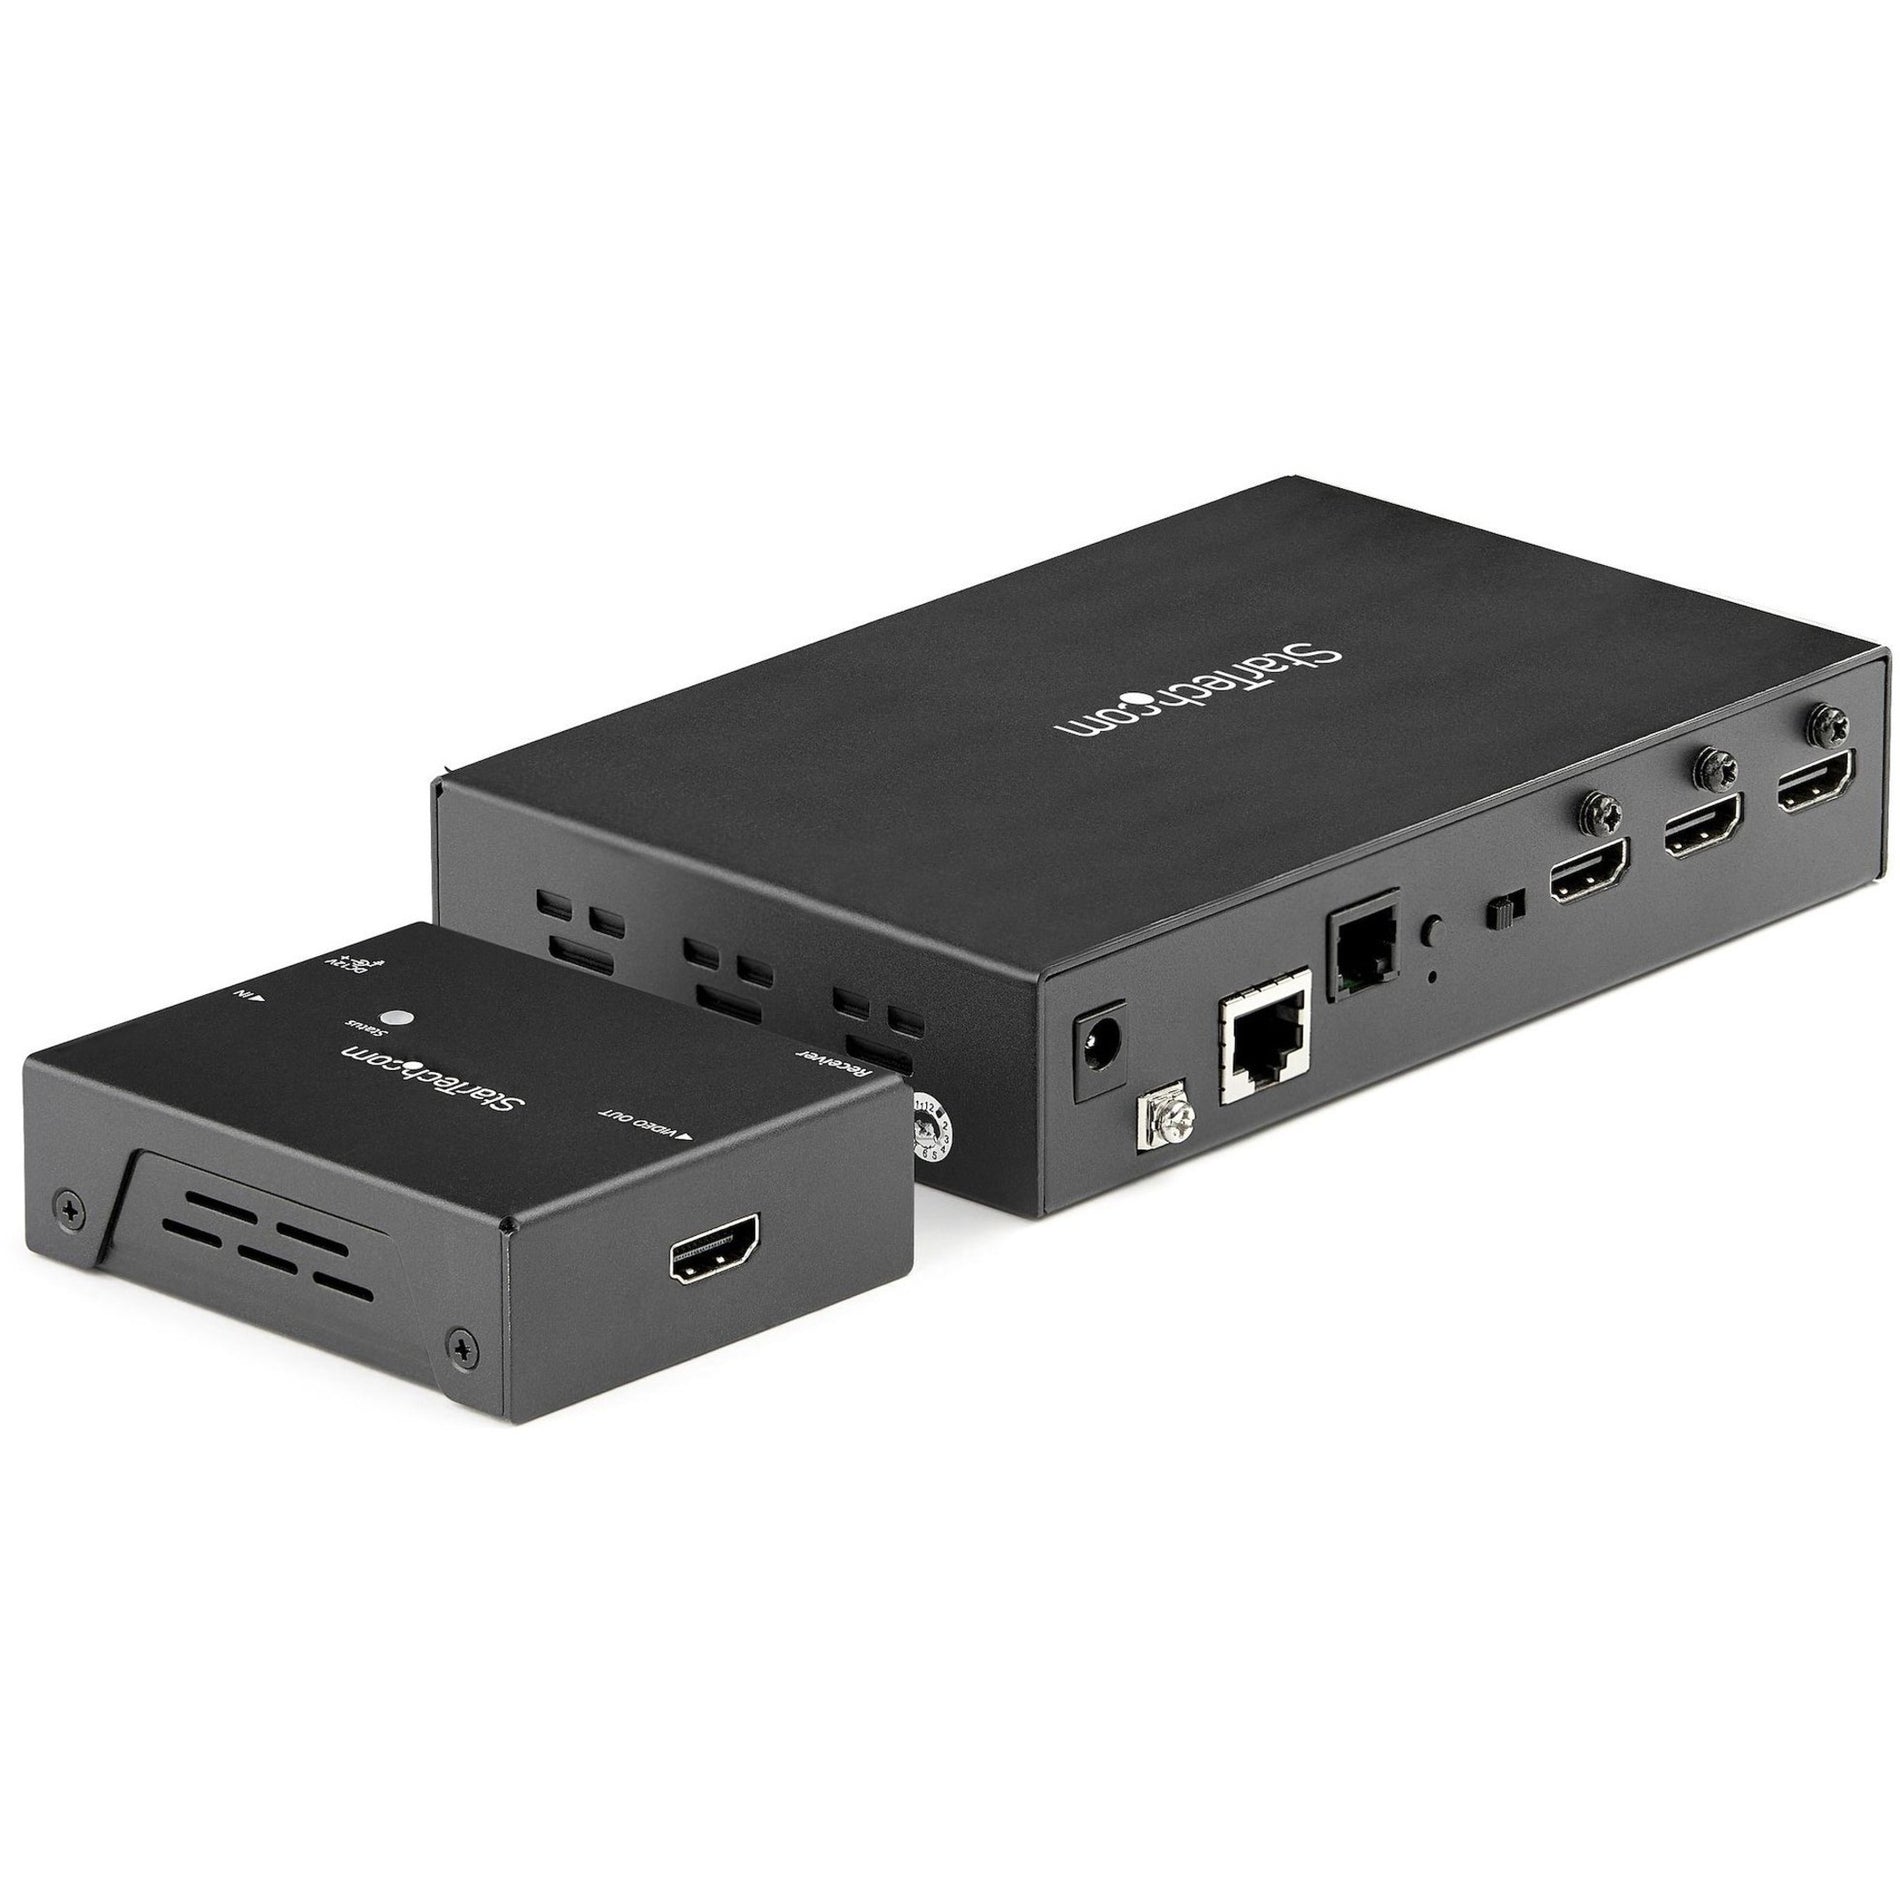 StarTech.com VS321HDBTK HDMI Extender over CAT6/5e with 3 Port Video Switch, 4K HDMI Switch Box, Video over HDBaseT with Auto Switcher